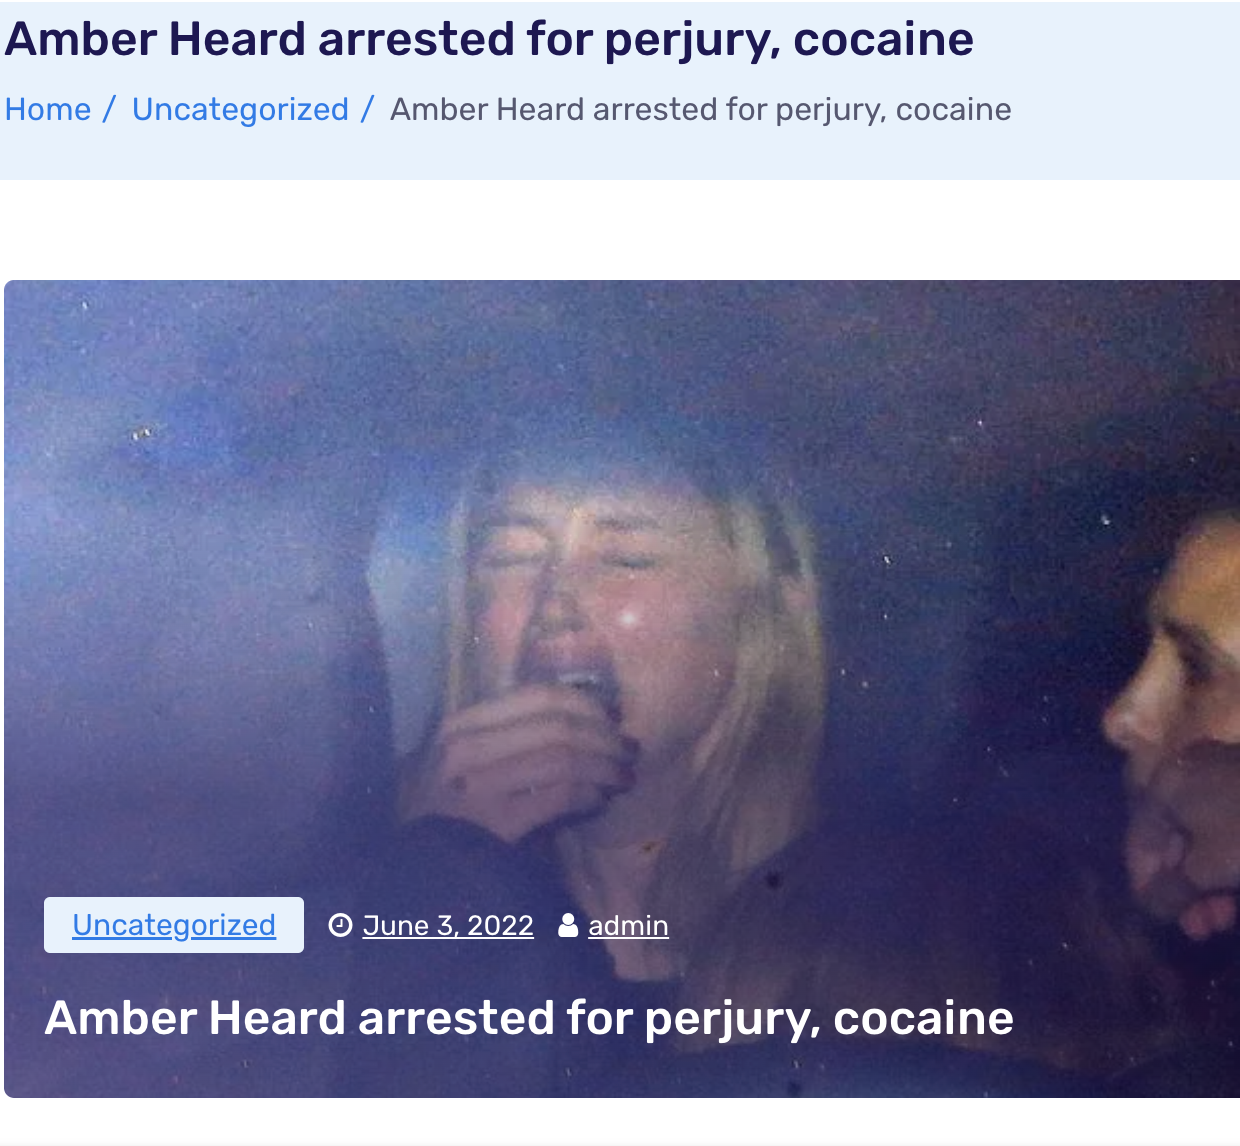 Fact Check: Amber Heard Was NOT Arrested For Perjury Cocaine As Of